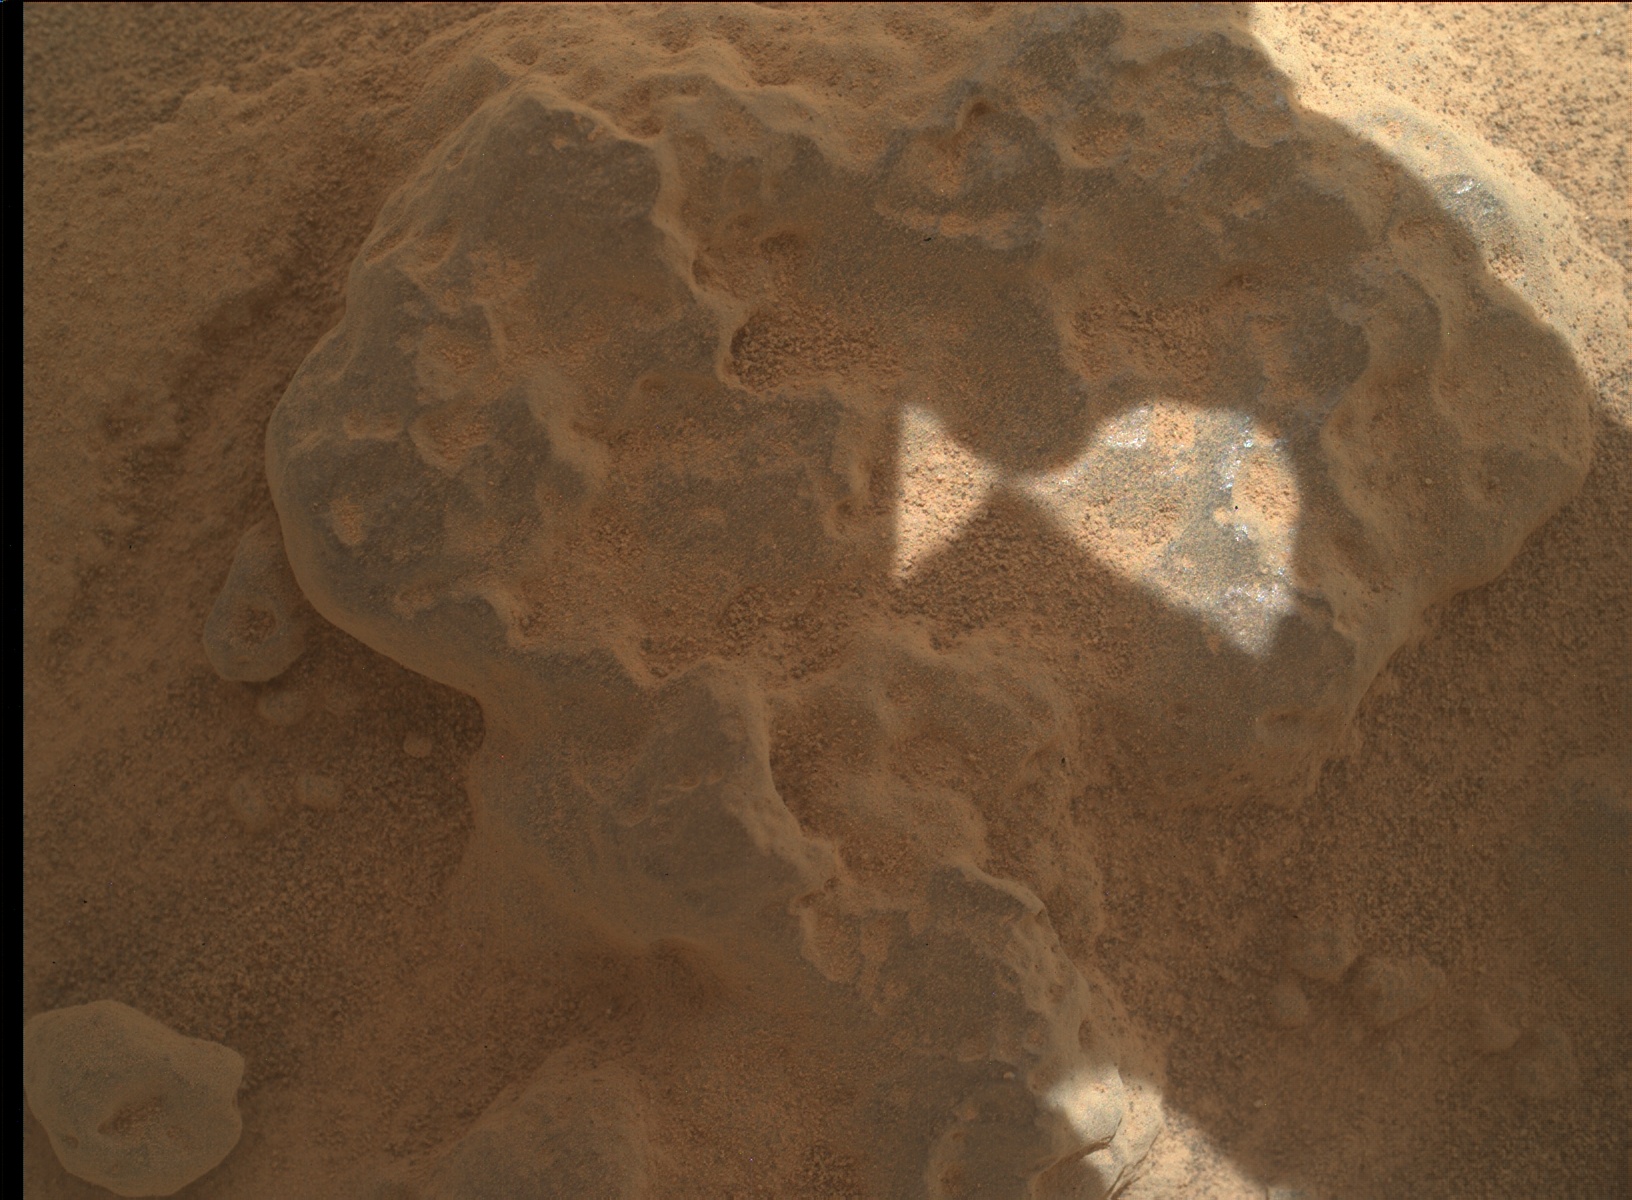 Nasa's Mars rover Curiosity acquired this image using its Mars Hand Lens Imager (MAHLI) on Sol 3739